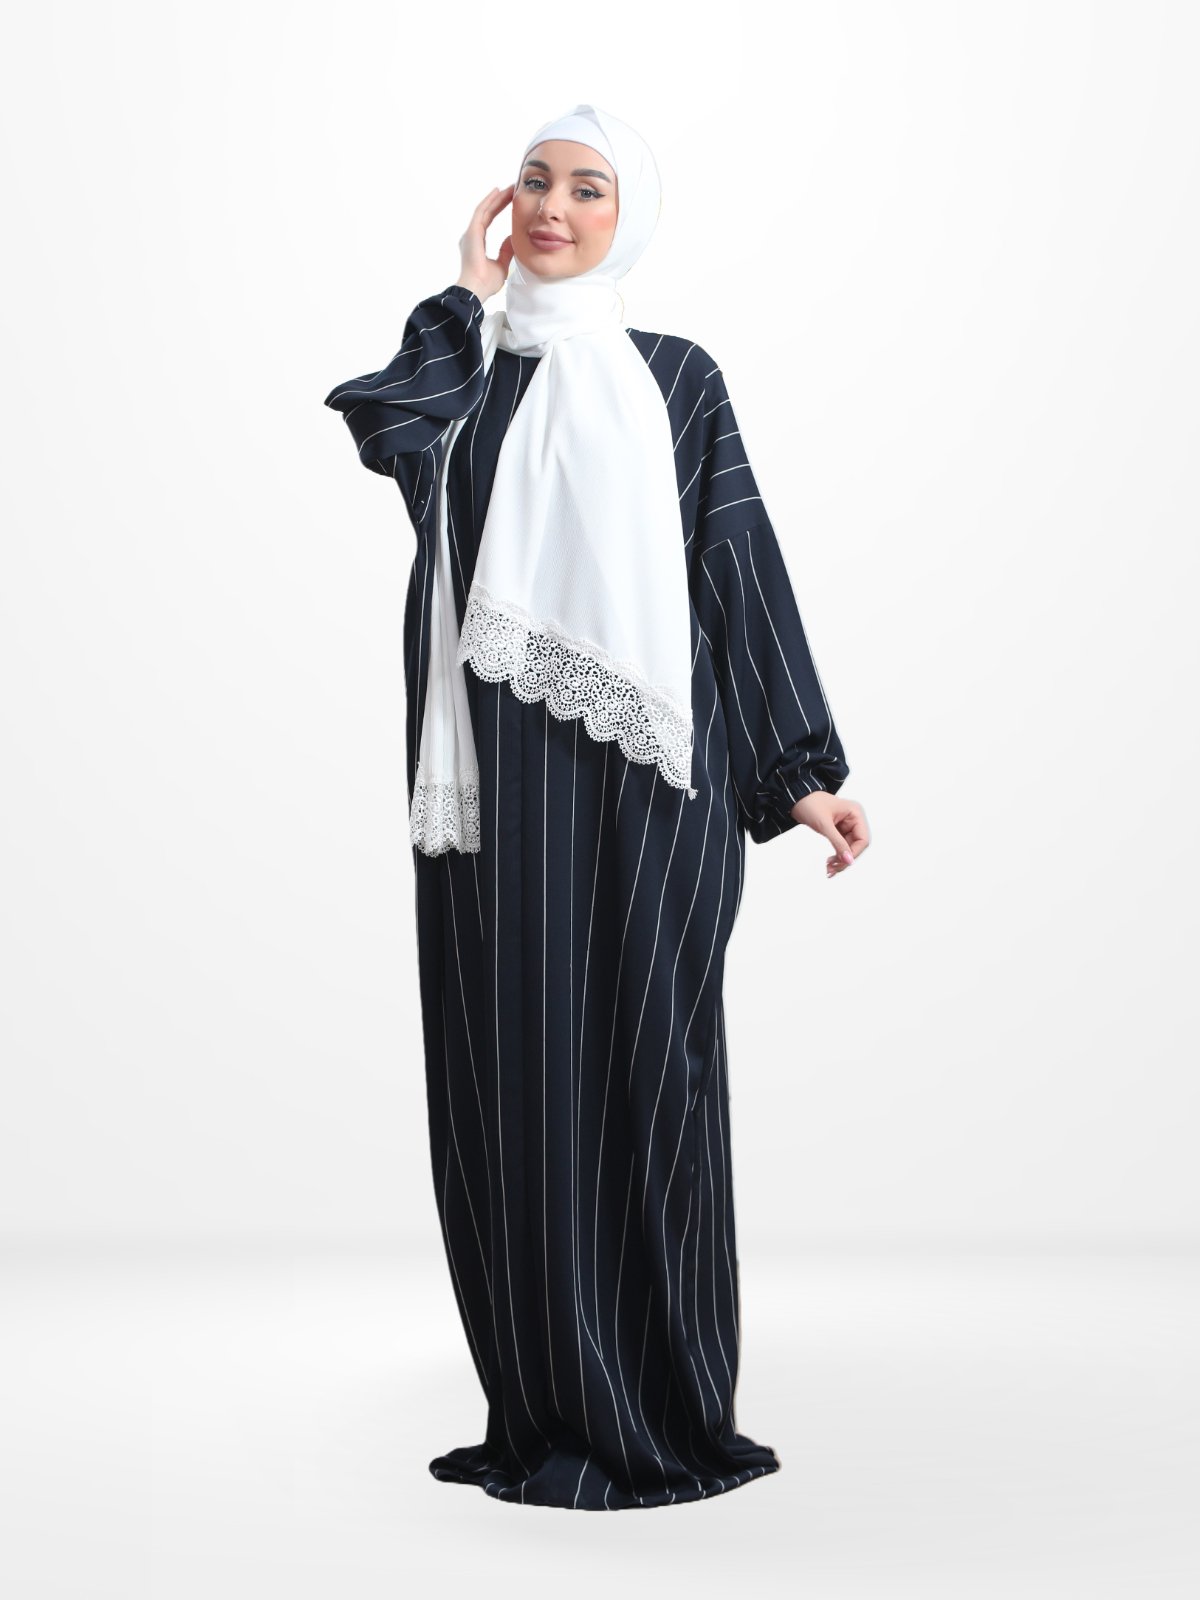 One - Piece Prayer Dress & Abaya with attached Hijab - Striped Crepe With White Scarf - Modest Essence